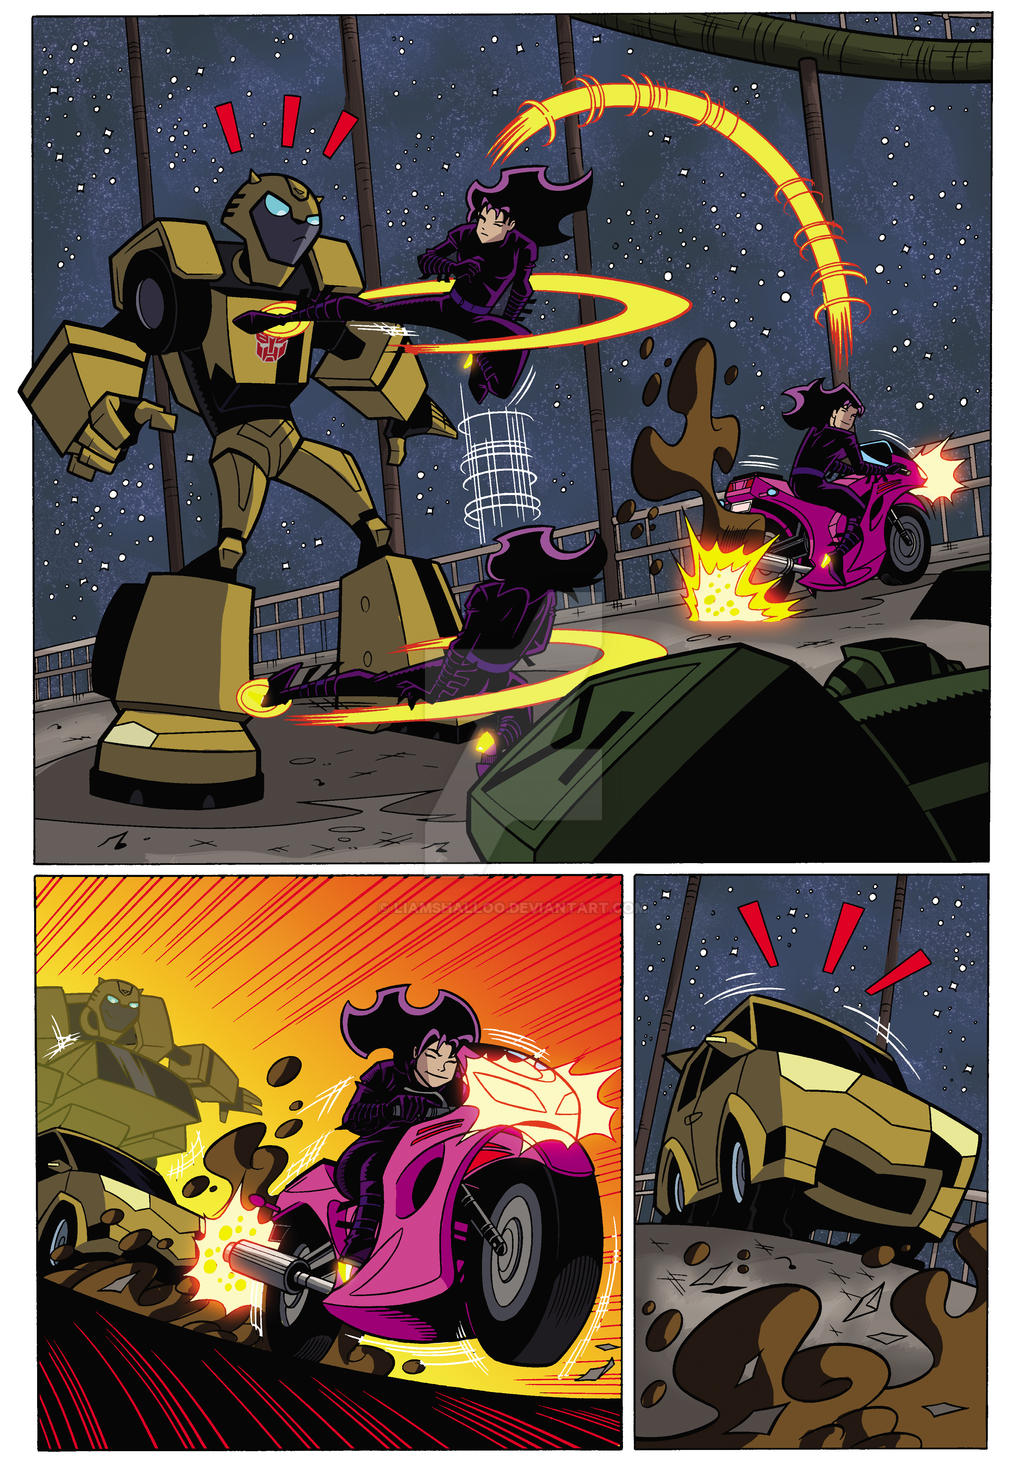 Transformers Animated 3 pg 8 by LiamShalloo on DeviantArt